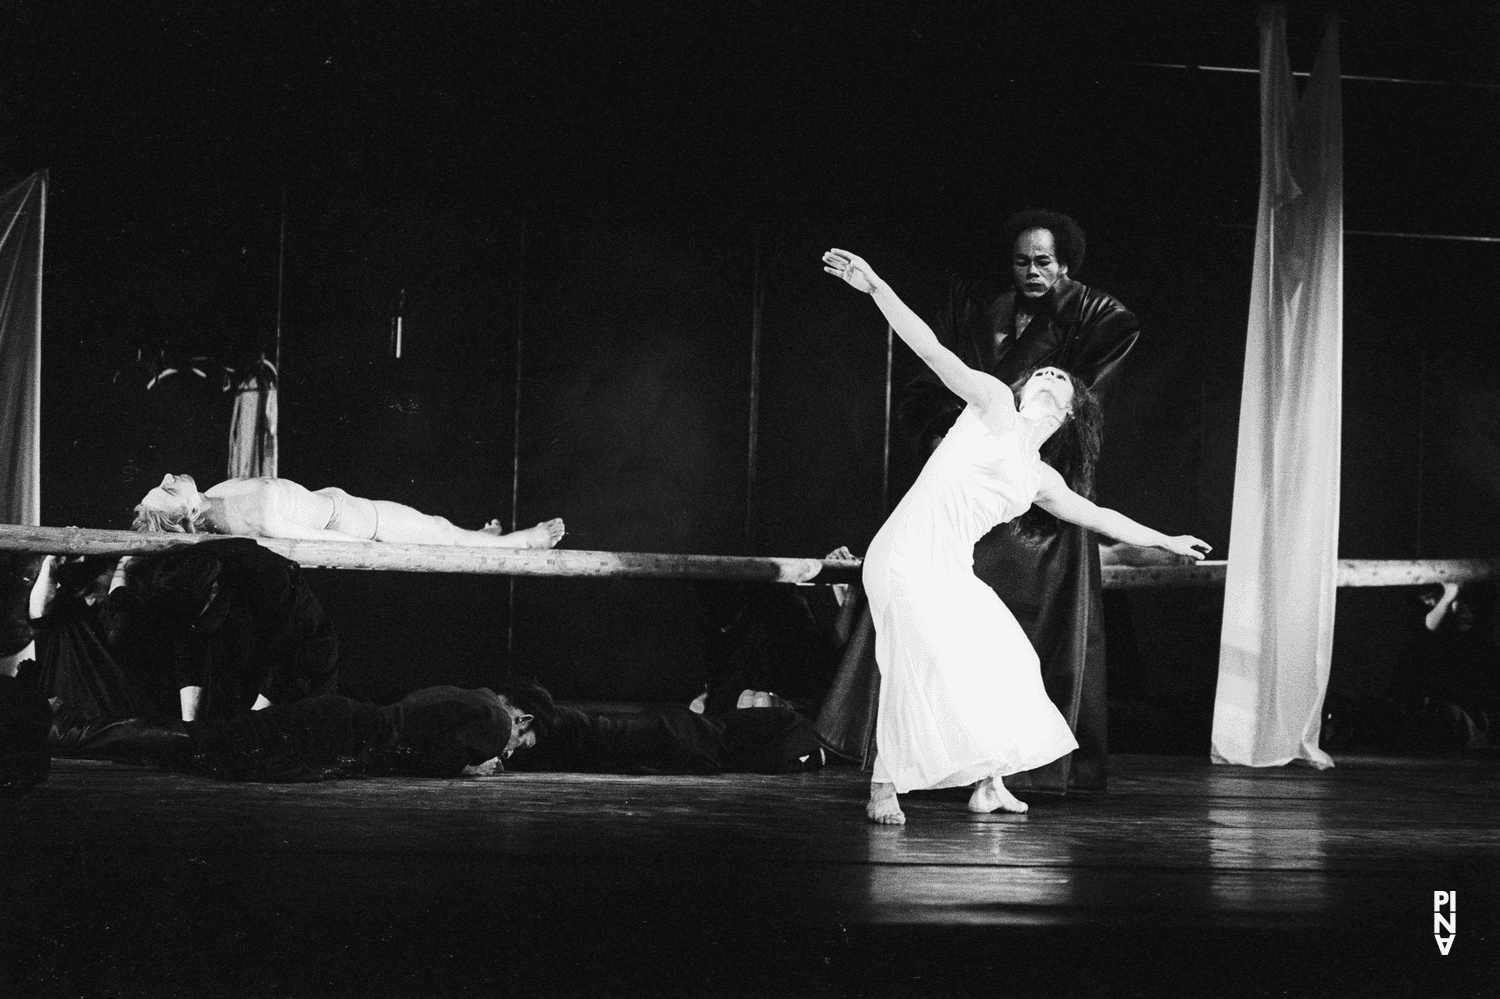 Dominique Mercy, Carlos Orta and Malou Airaudo in “Iphigenie auf Tauris” by Pina Bausch with Tanztheater Wuppertal at Opernhaus Wuppertal (Germany), April 20, 1974